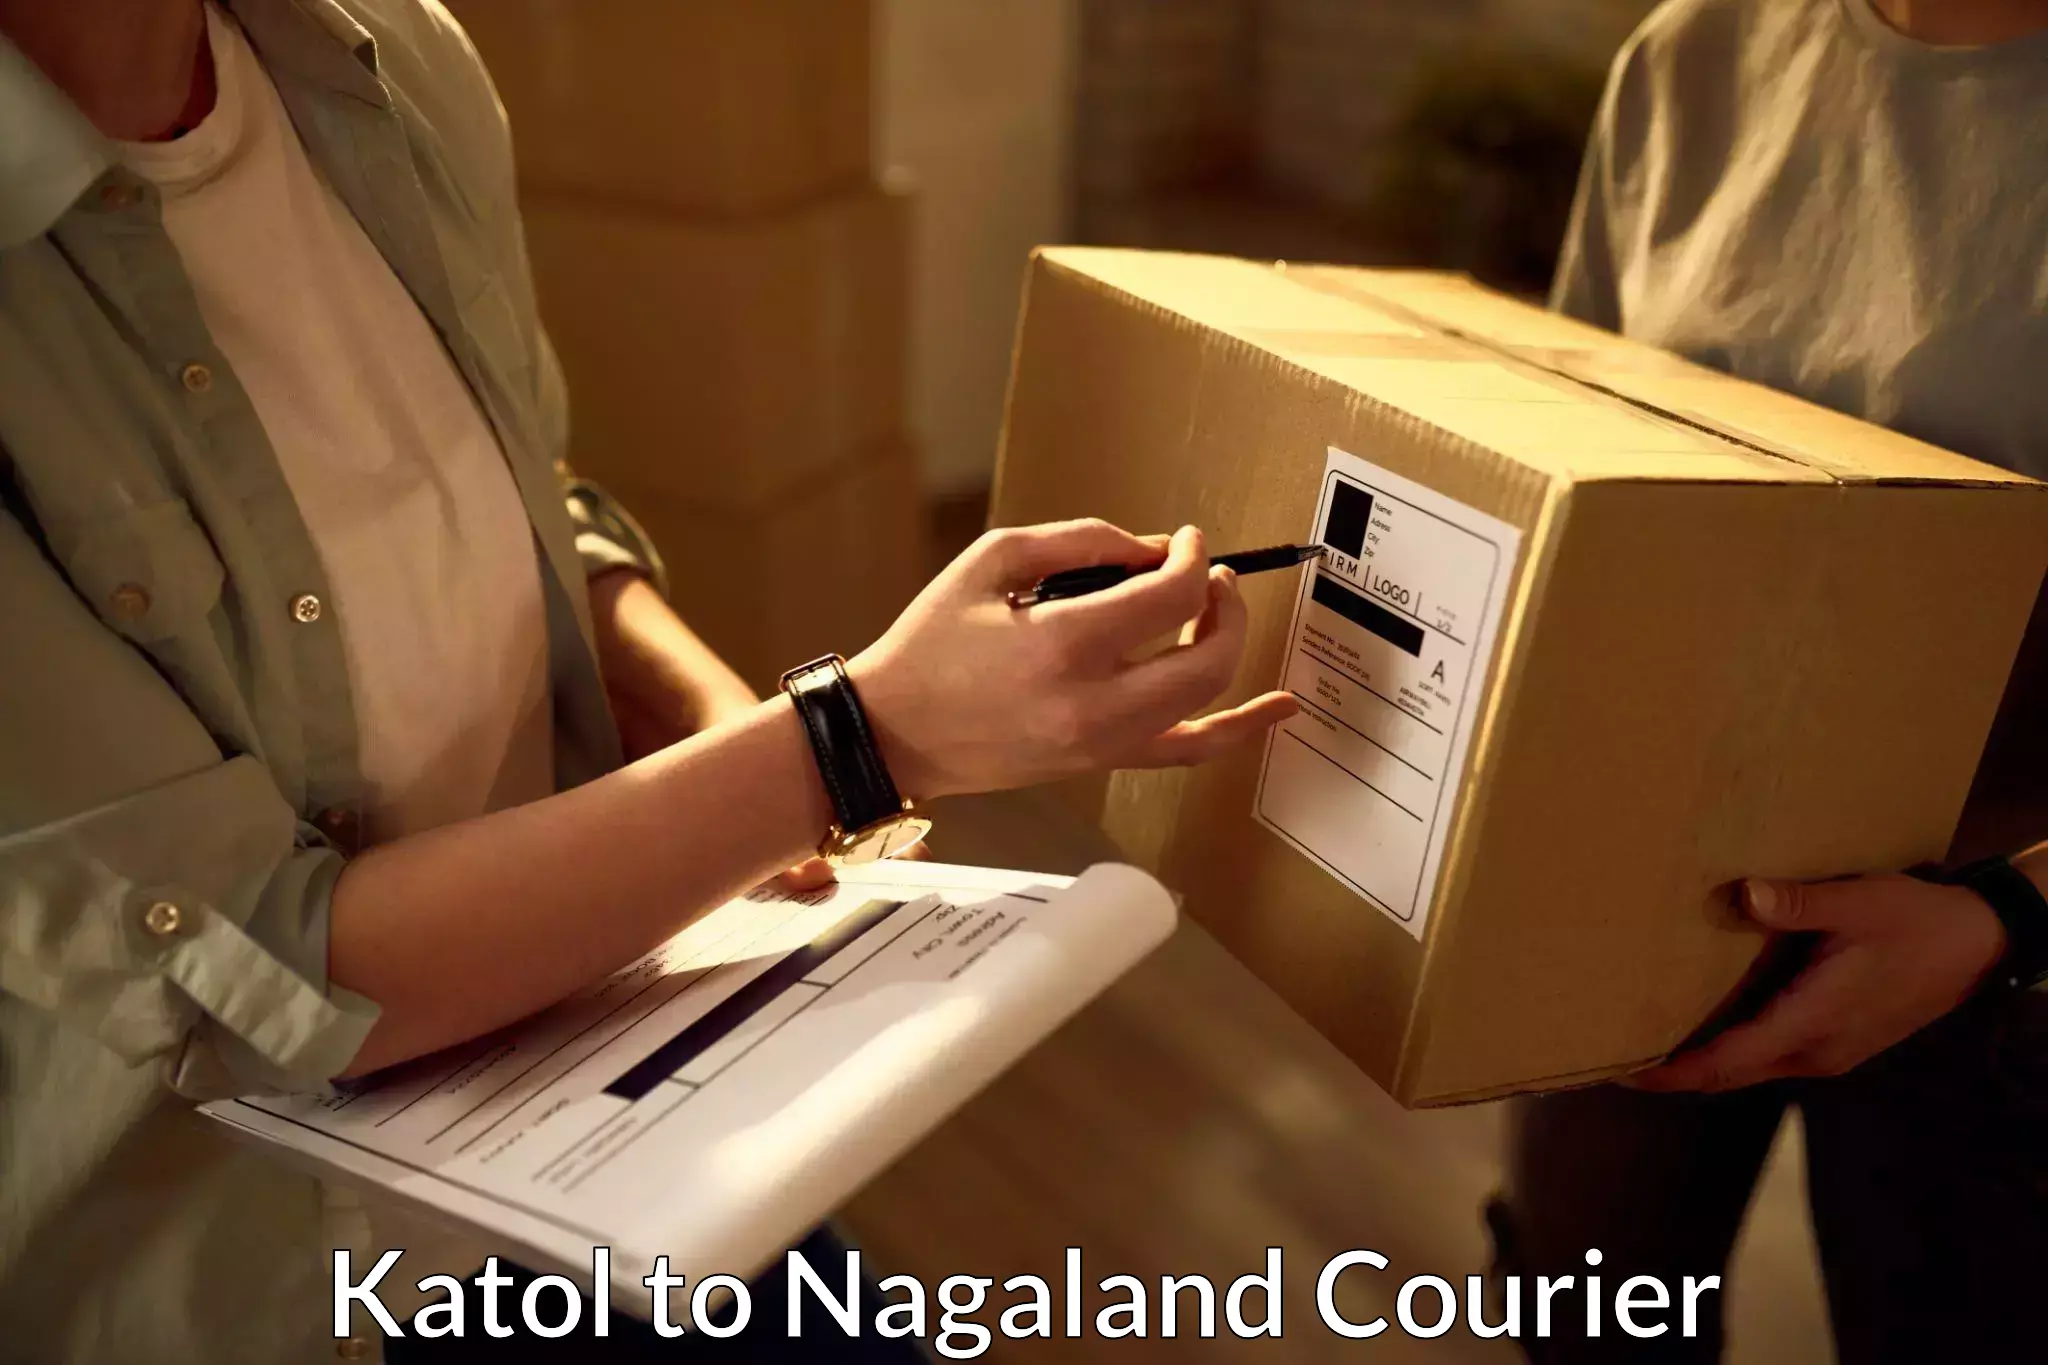 Rural area delivery Katol to Nagaland